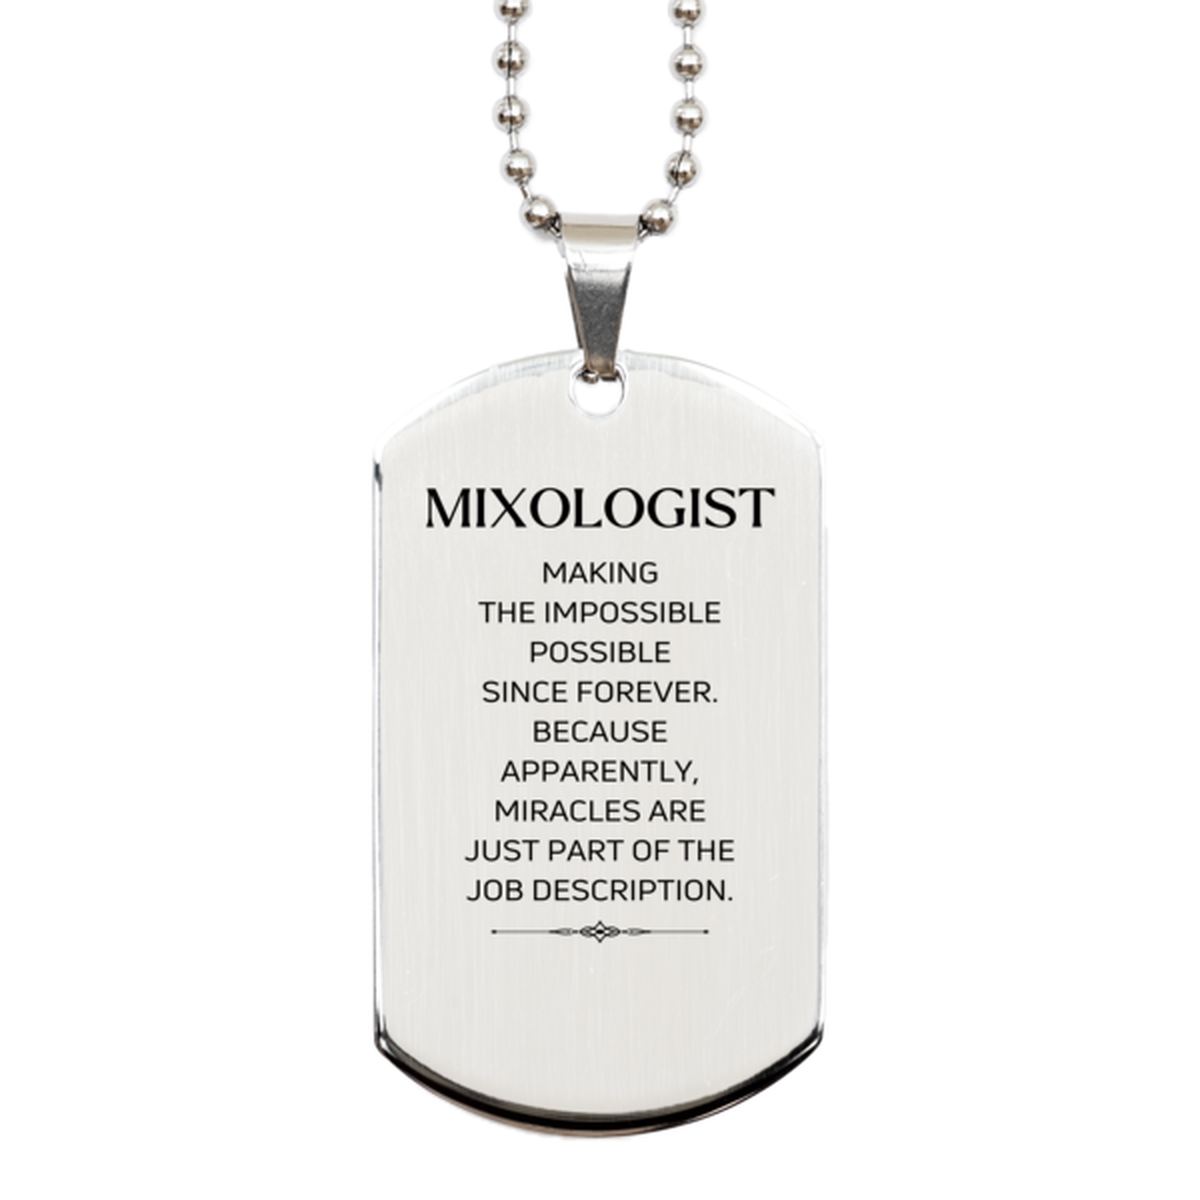 Funny Mixologist Gifts, Miracles are just part of the job description, Inspirational Birthday Silver Dog Tag For Mixologist, Men, Women, Coworkers, Friends, Boss